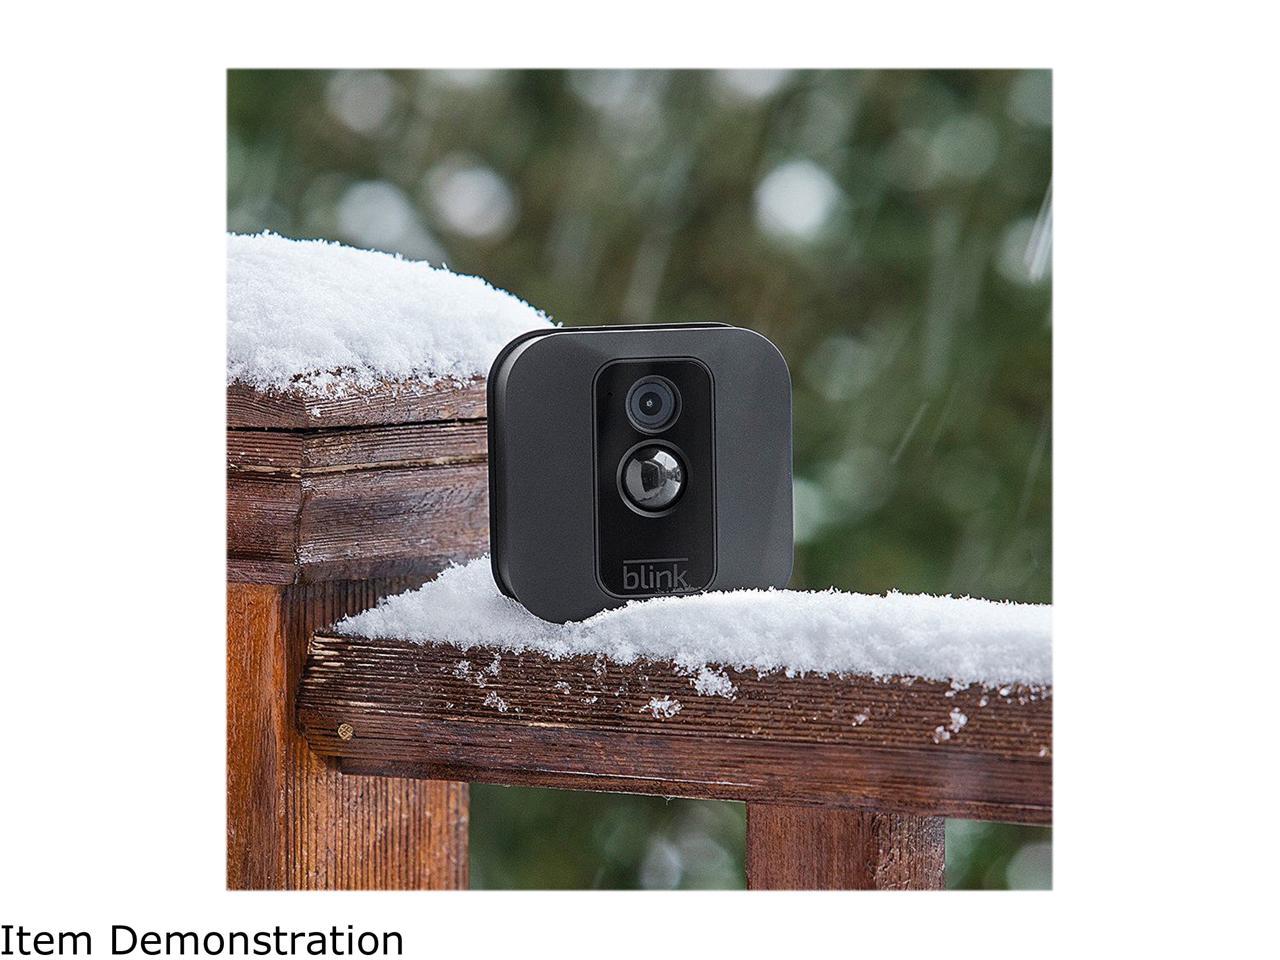 Blink XT Home Security Camera System with Motion Detection Wall Mount HD Video 